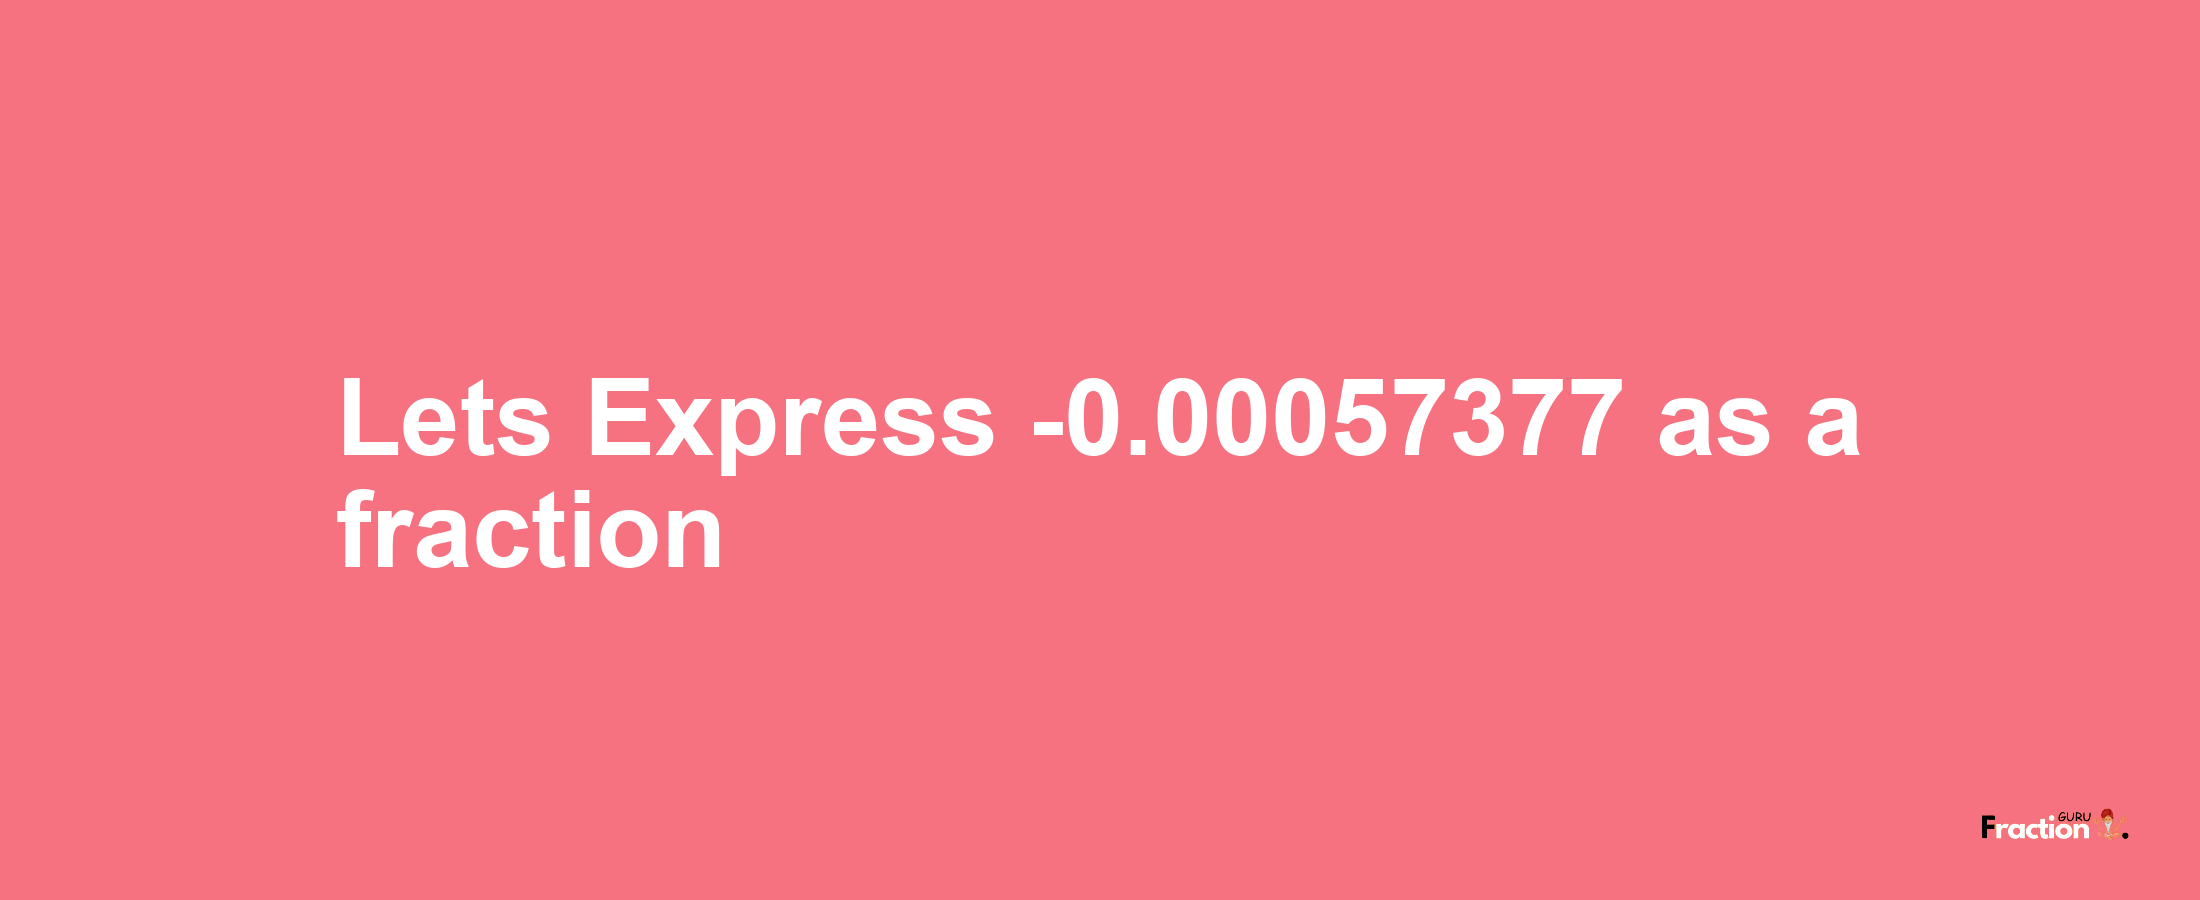 Lets Express -0.00057377 as afraction